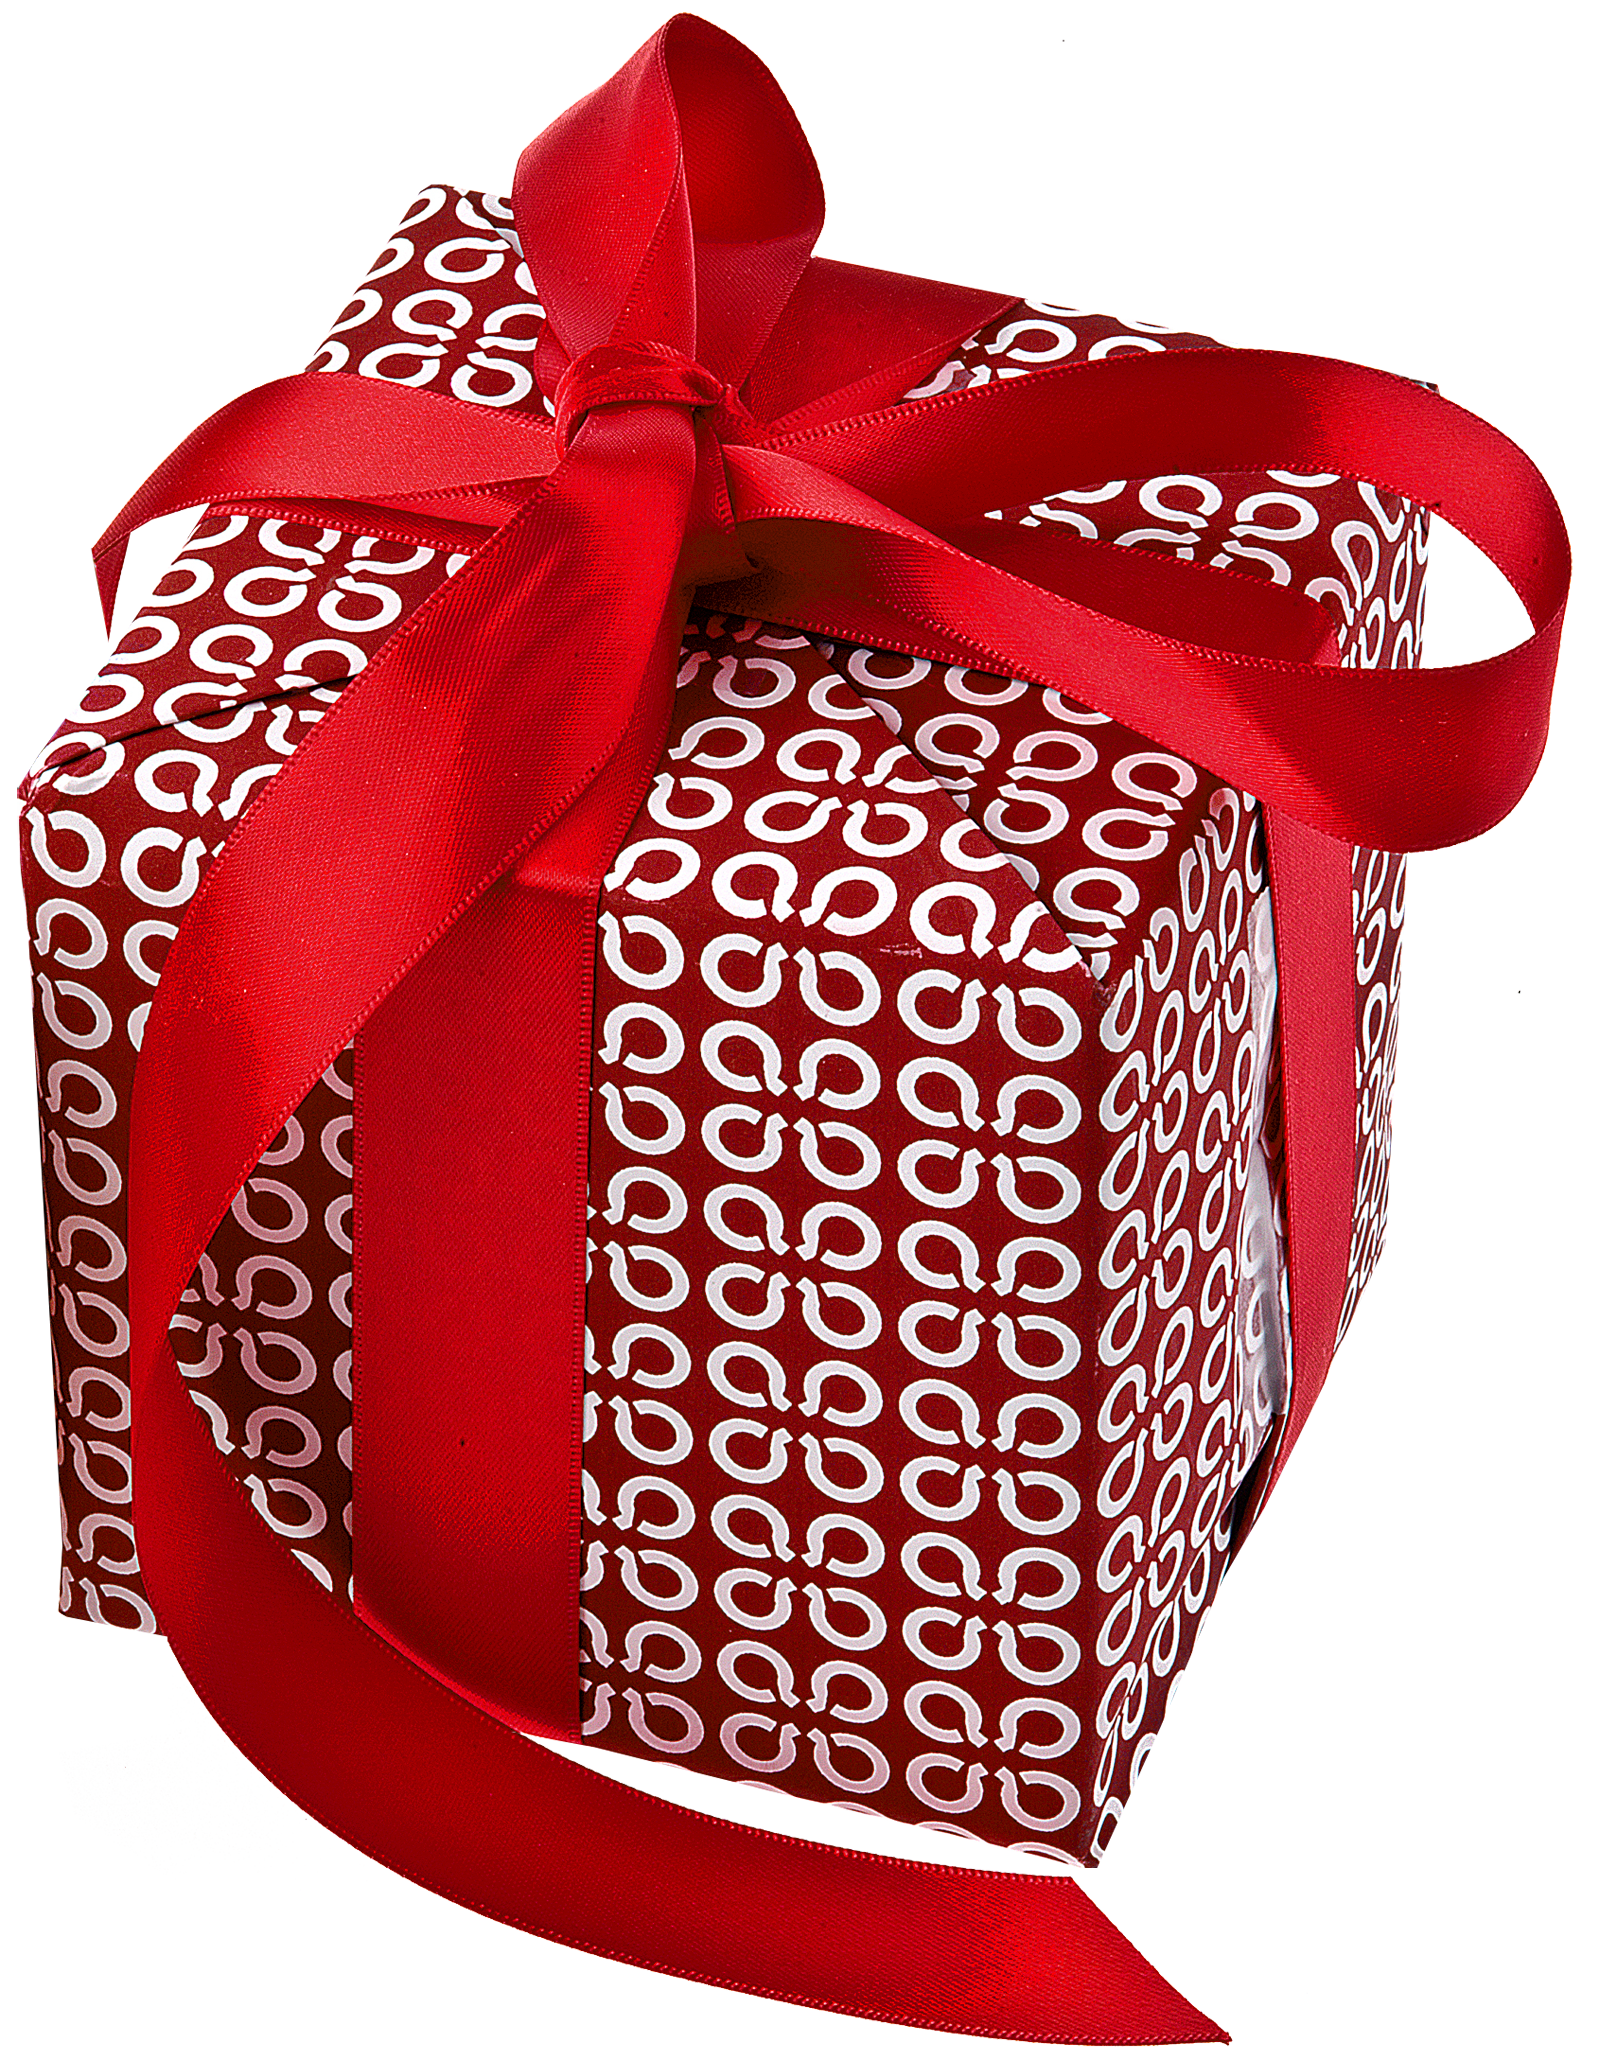 gift_PNG5970